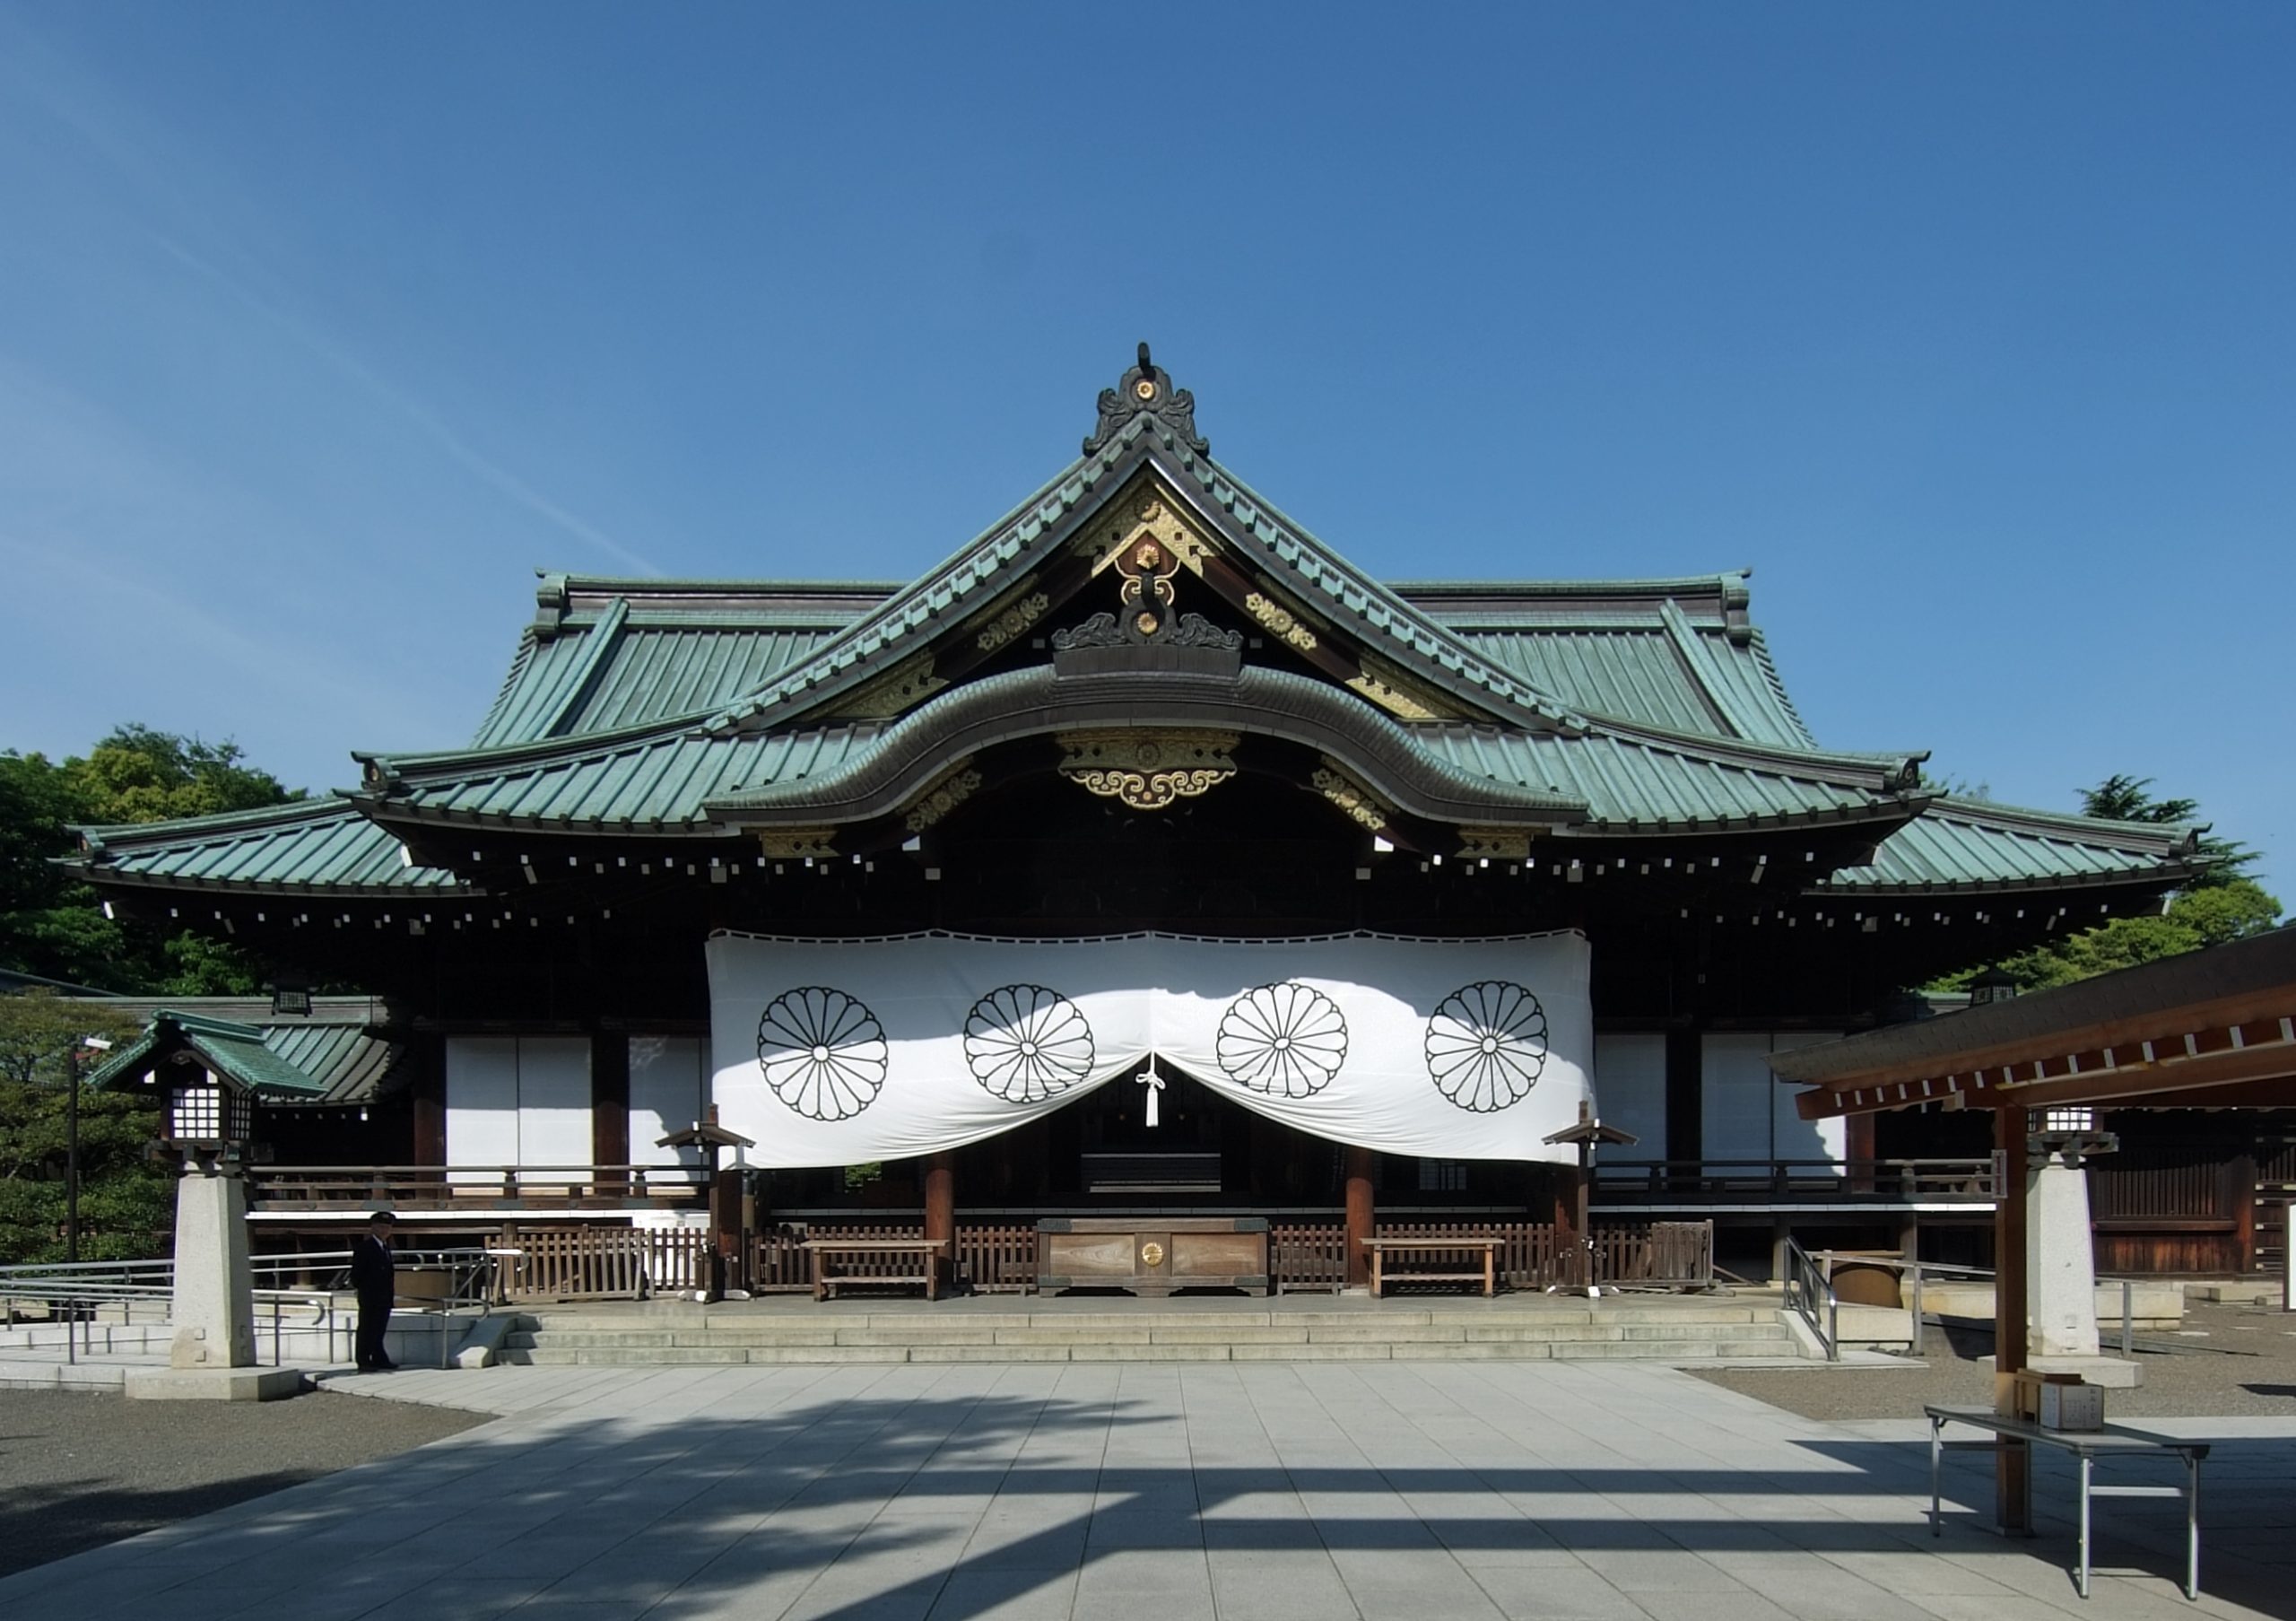 Photo of Yasukuni Shrine in Tokyo. It is a traditional looking Japanese shrine with a green roof